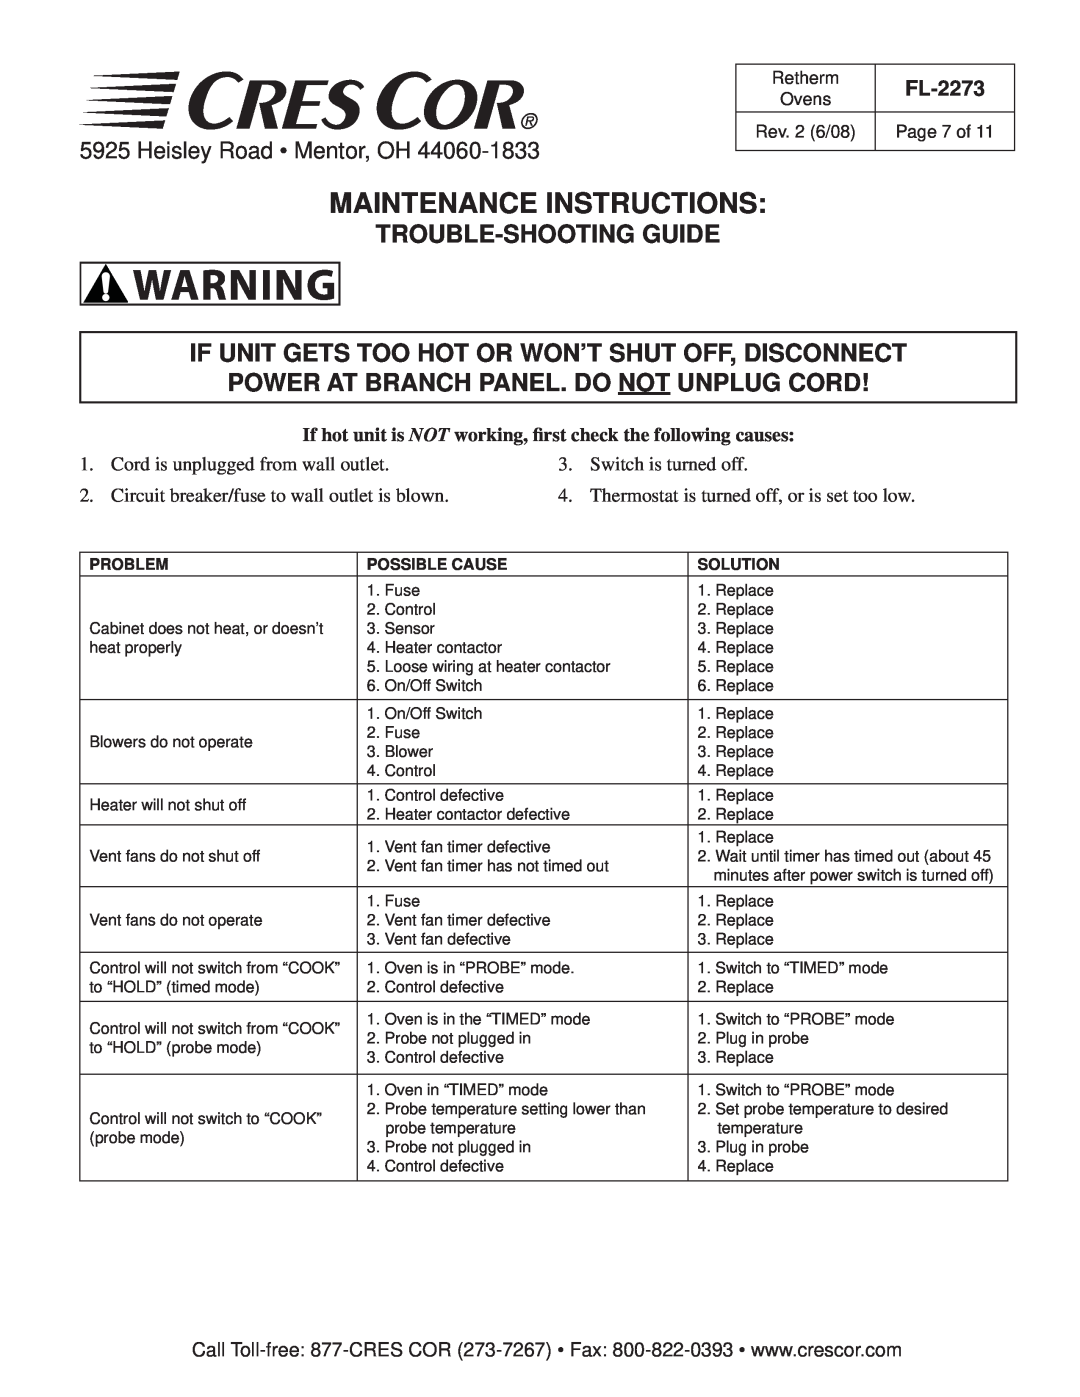 Cres Cor RR-1332 Series Retherm Ovens Maintenance Instructions, Trouble-Shooting Guide, Heisley Road Mentor, OH, FL-2273 